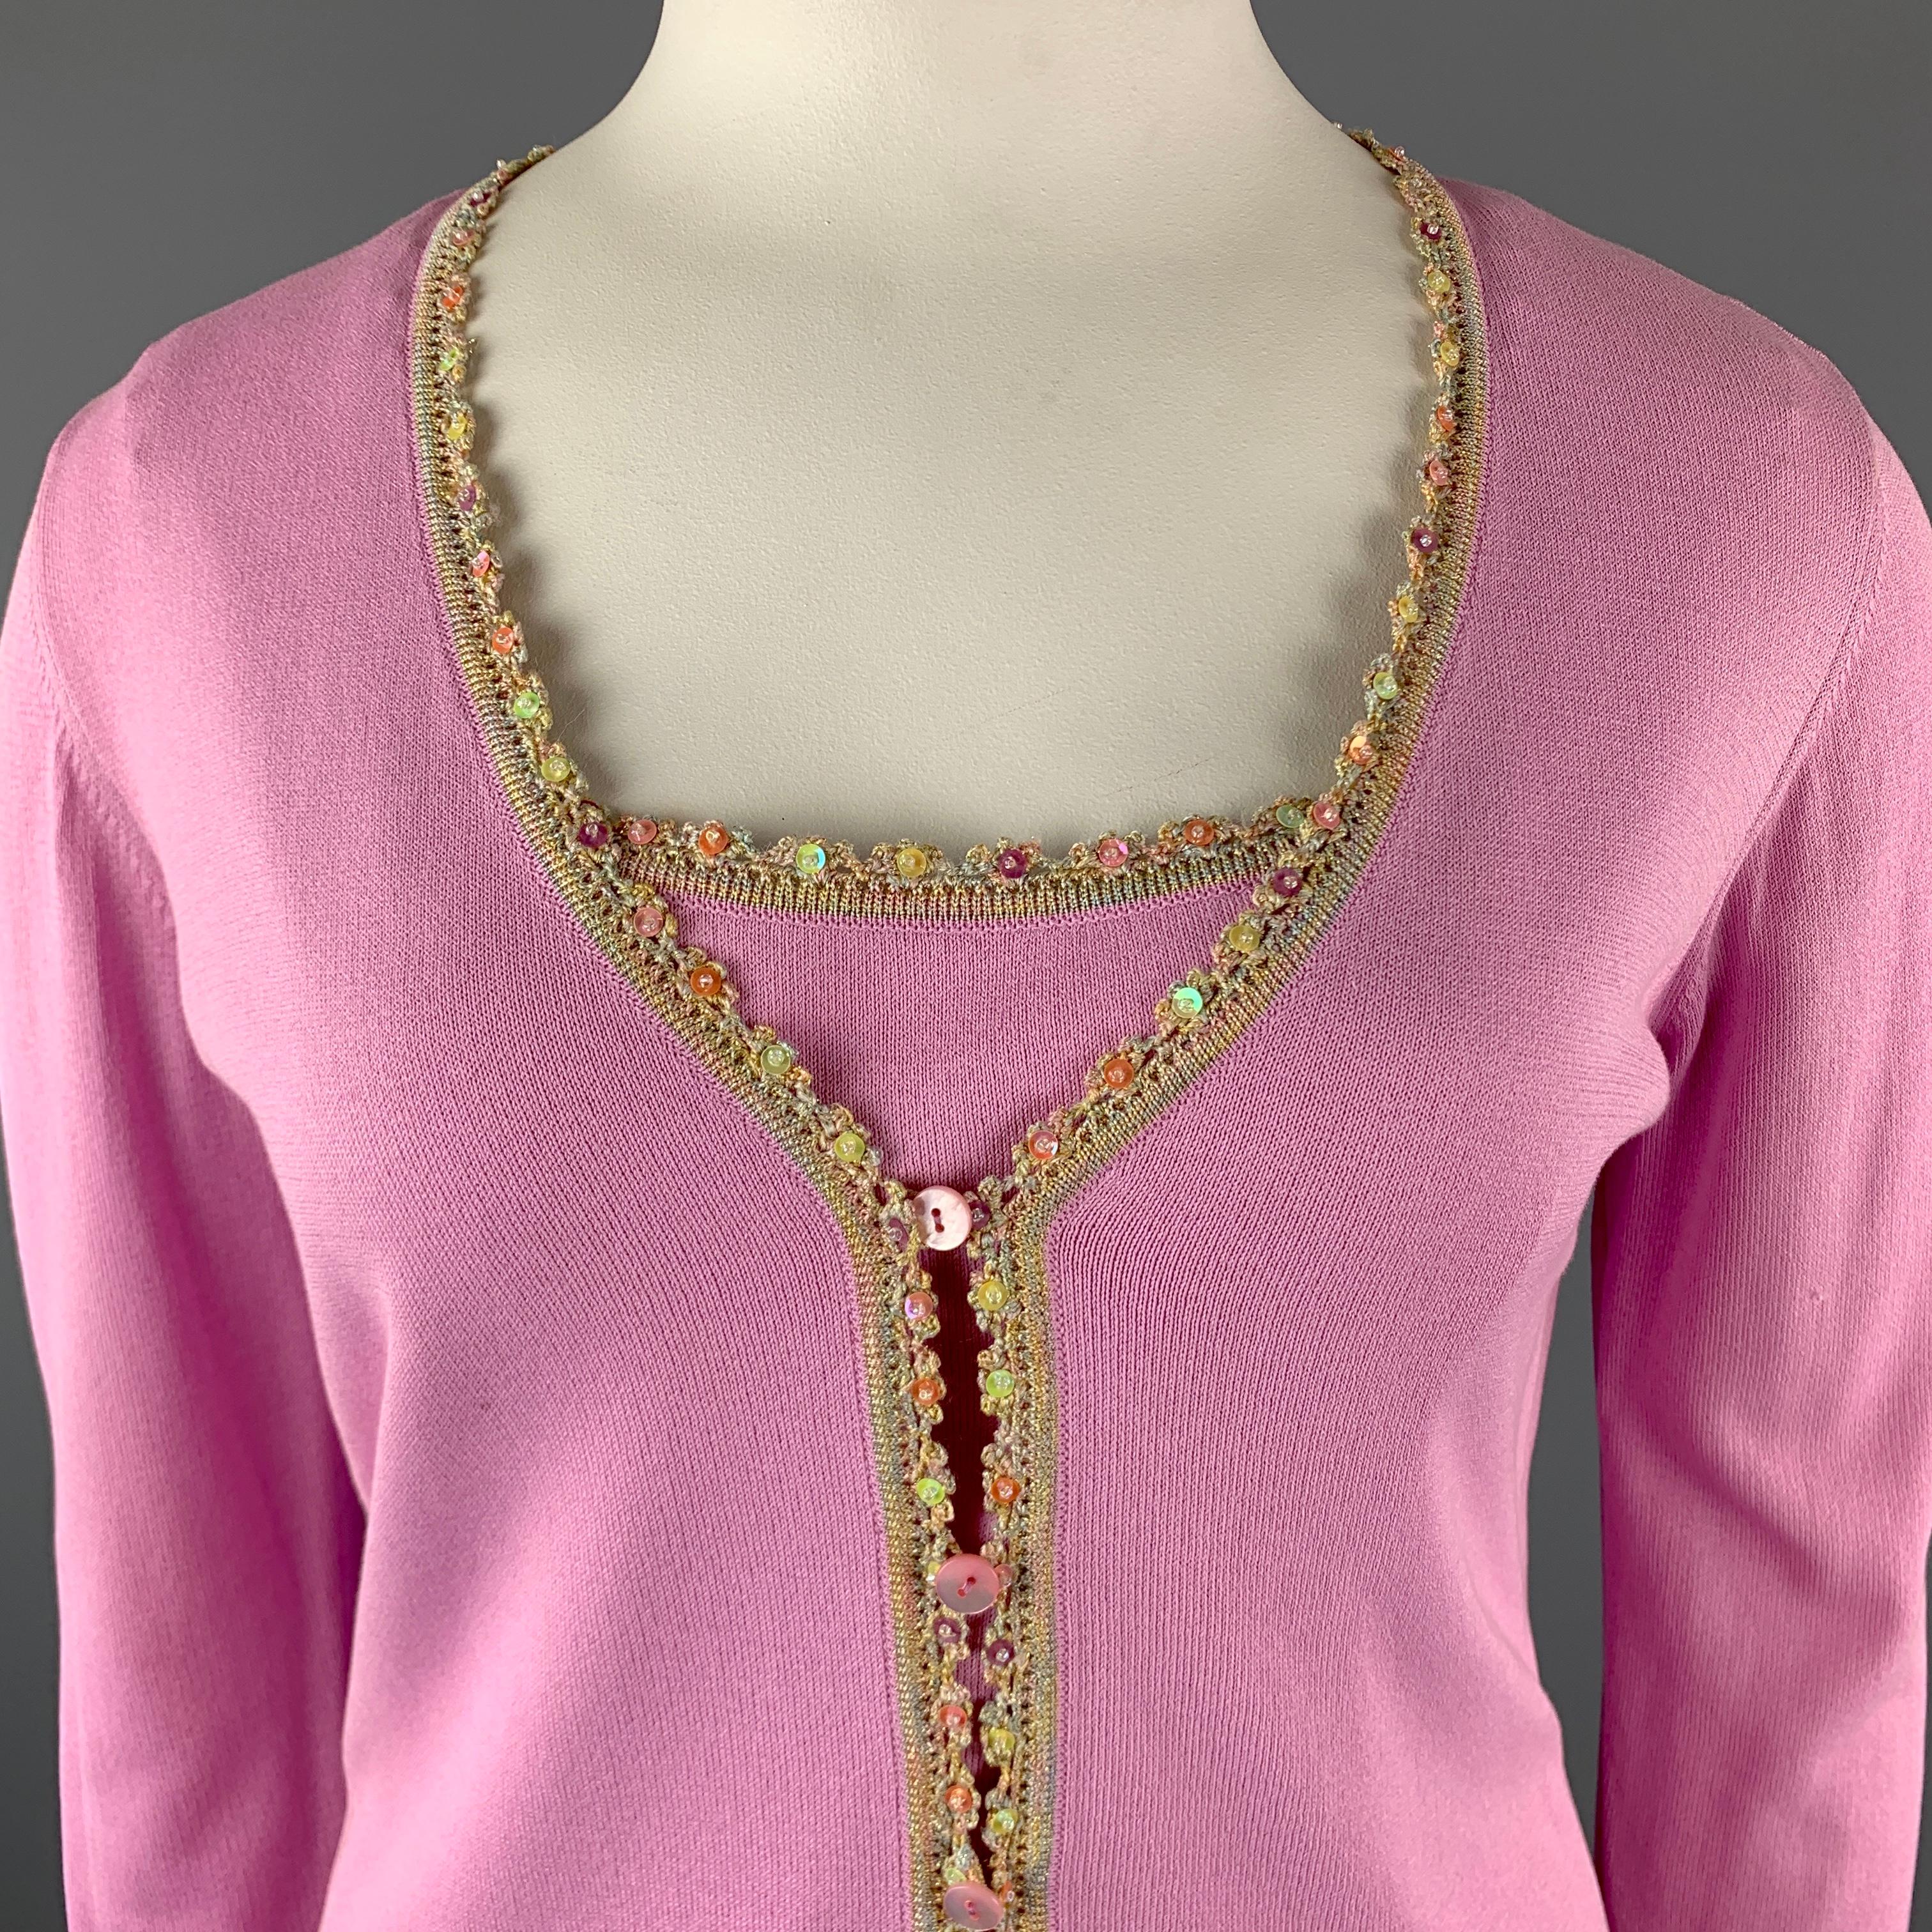 ESCADA Cardigan Camisole Set comes in a pink tone in a solid rayon blend material, a contrast embellished trim, and includes a V-neck cardigan with faux slit pockets, and a matching tank top sleeveless camisole. Minor wear. 

Very Good Pre-Owned